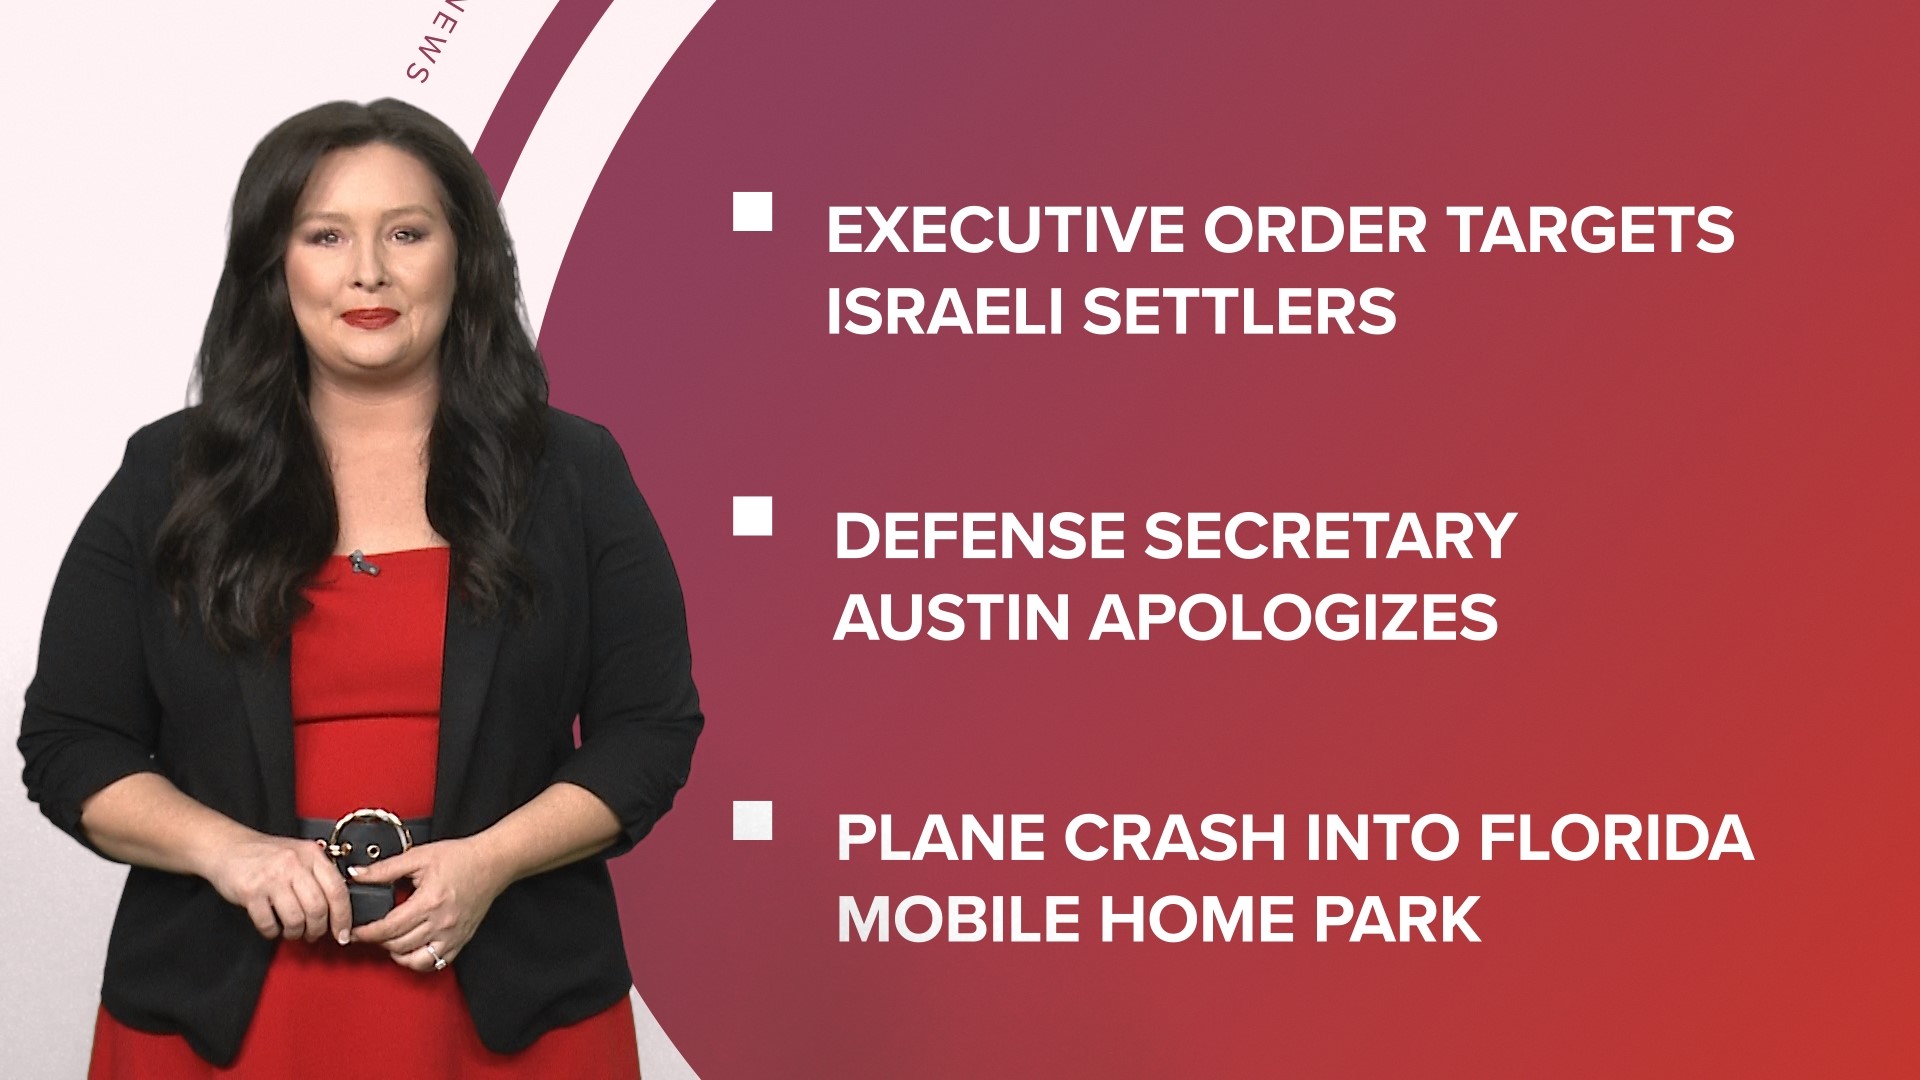 A look at what is happening in the news from a plane crash into a Florida mobile home park to new reparations bills introduced in California and more.